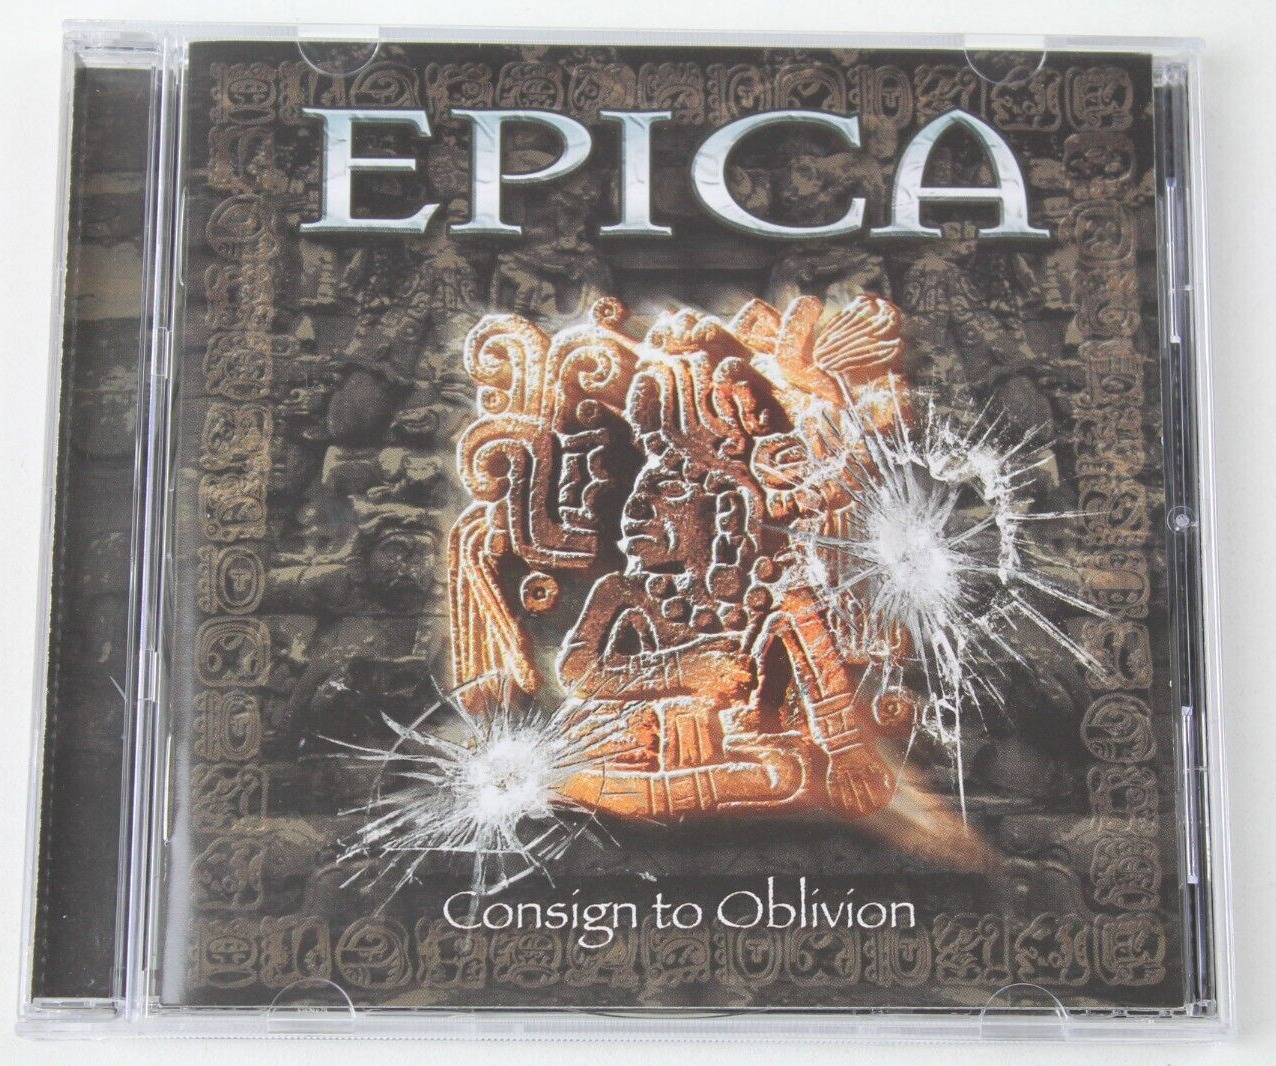 EPICA - Consign To Oblivion - CD